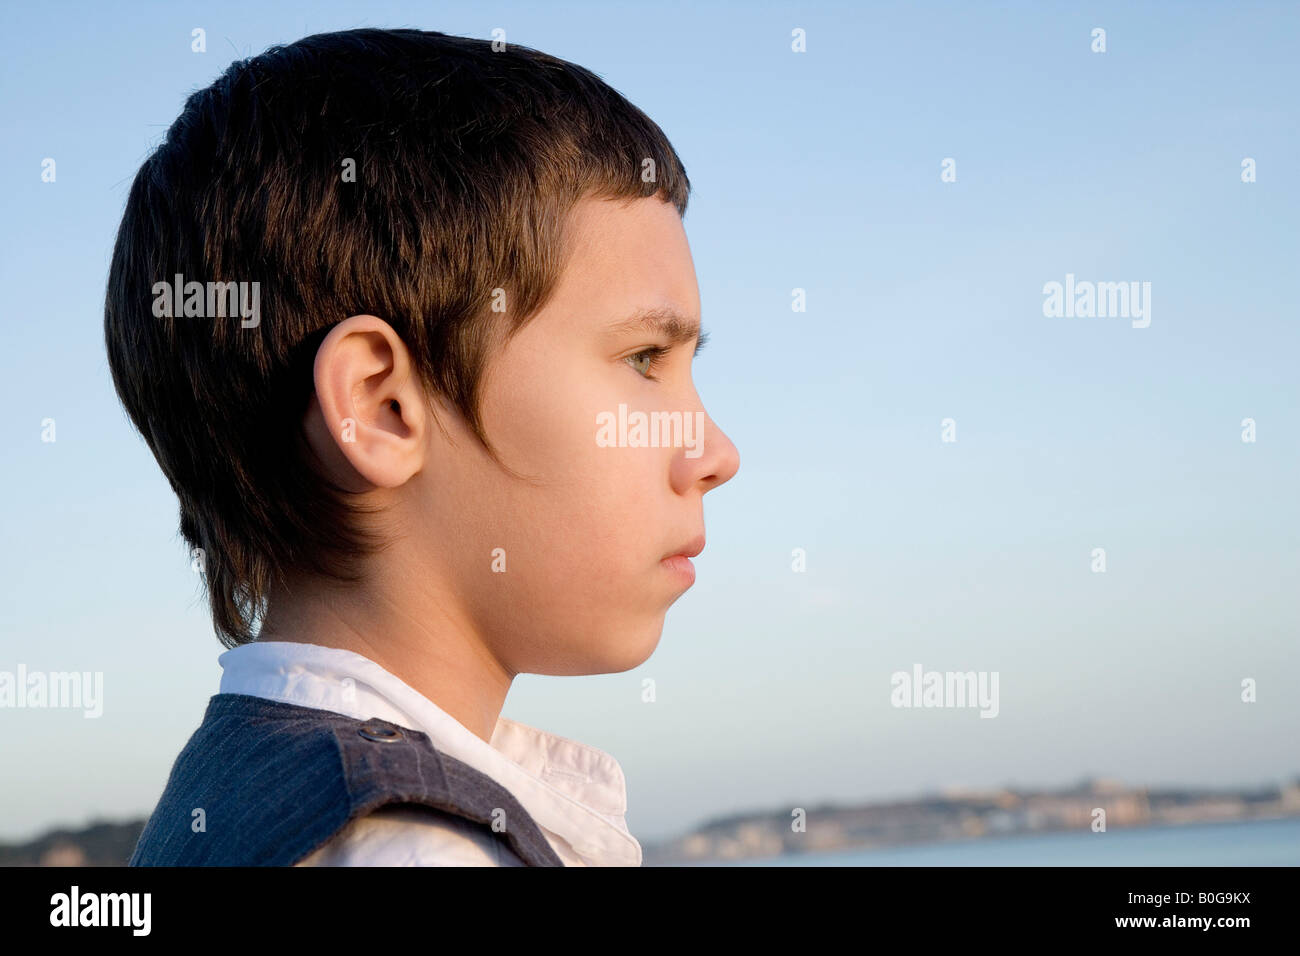 Young boy looking out to sea Stock Photo